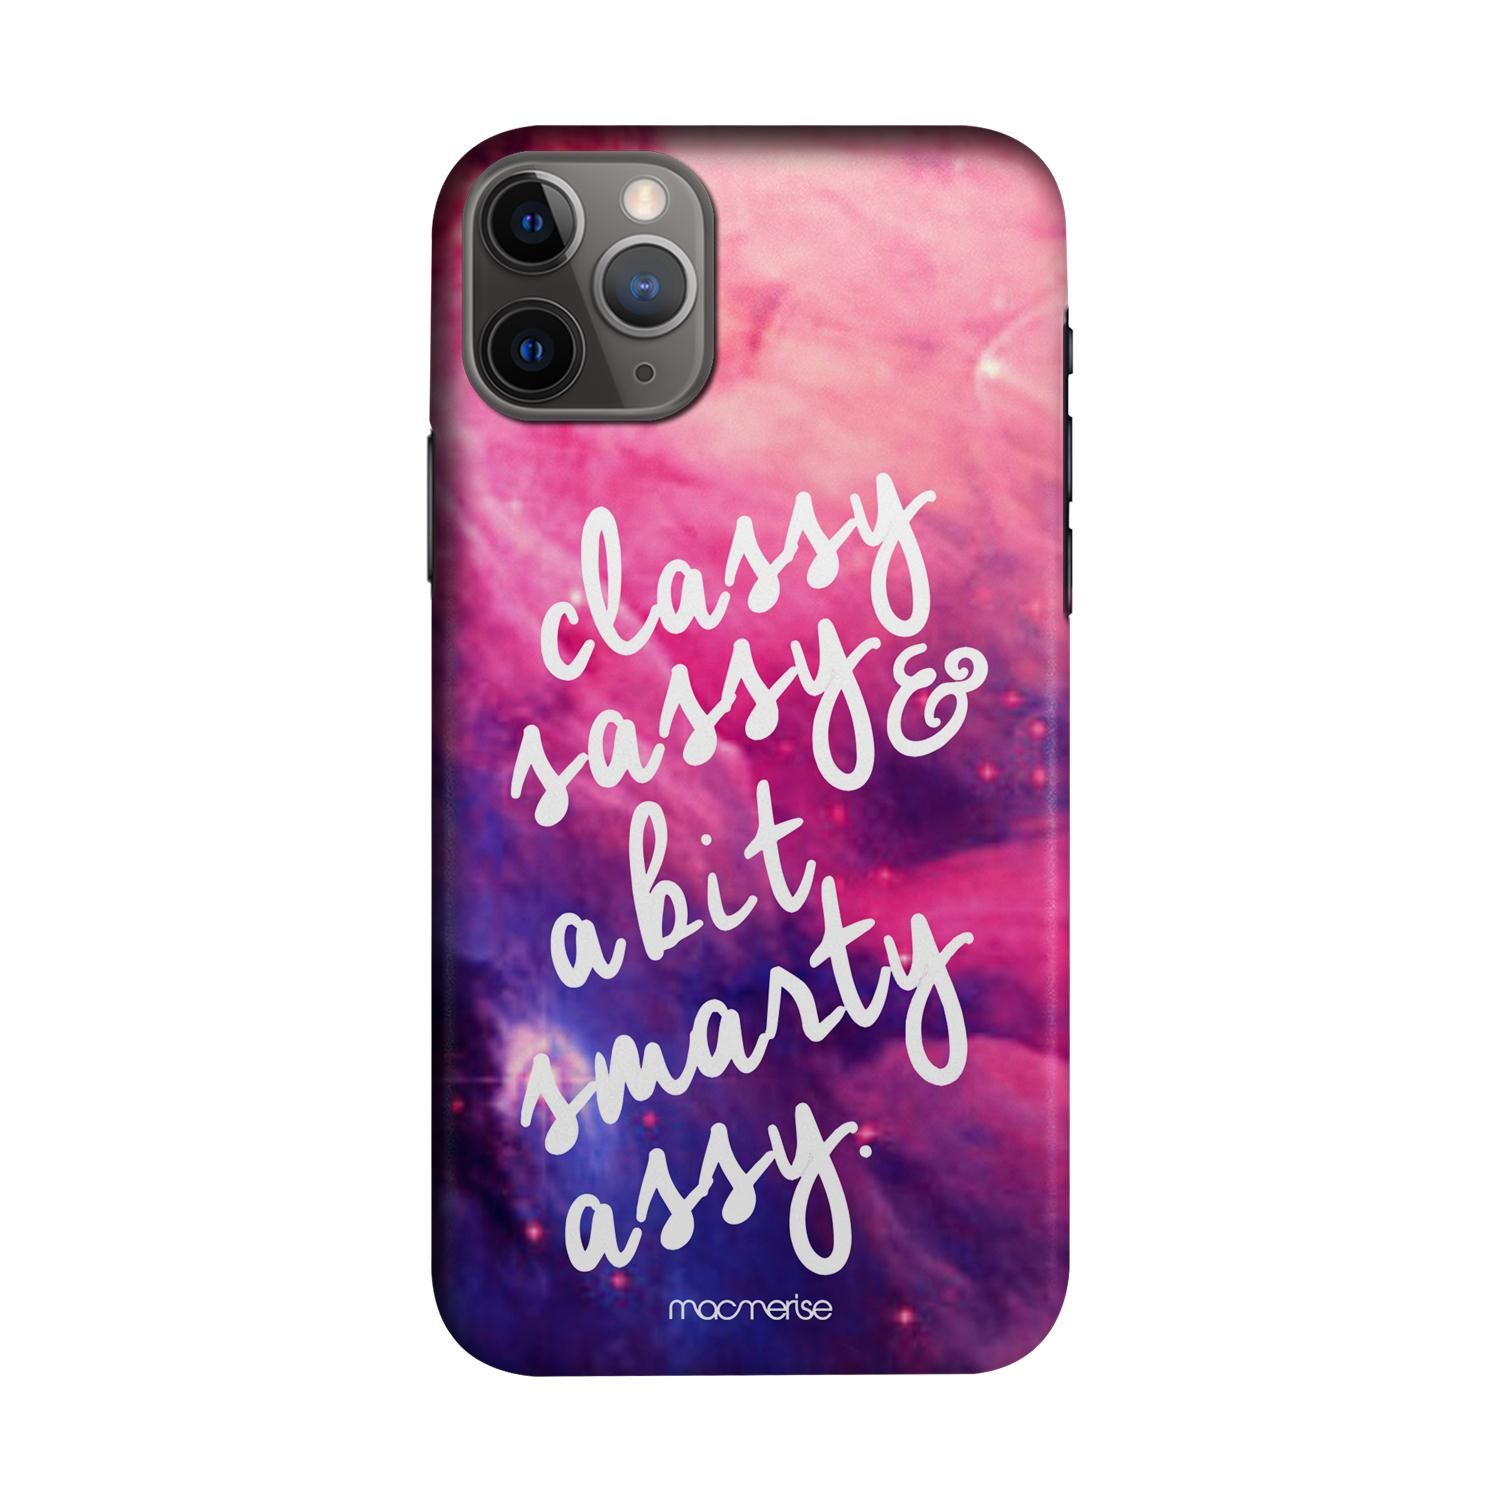 Buy Smarty Assy - Sleek Phone Case for iPhone 11 Pro Online